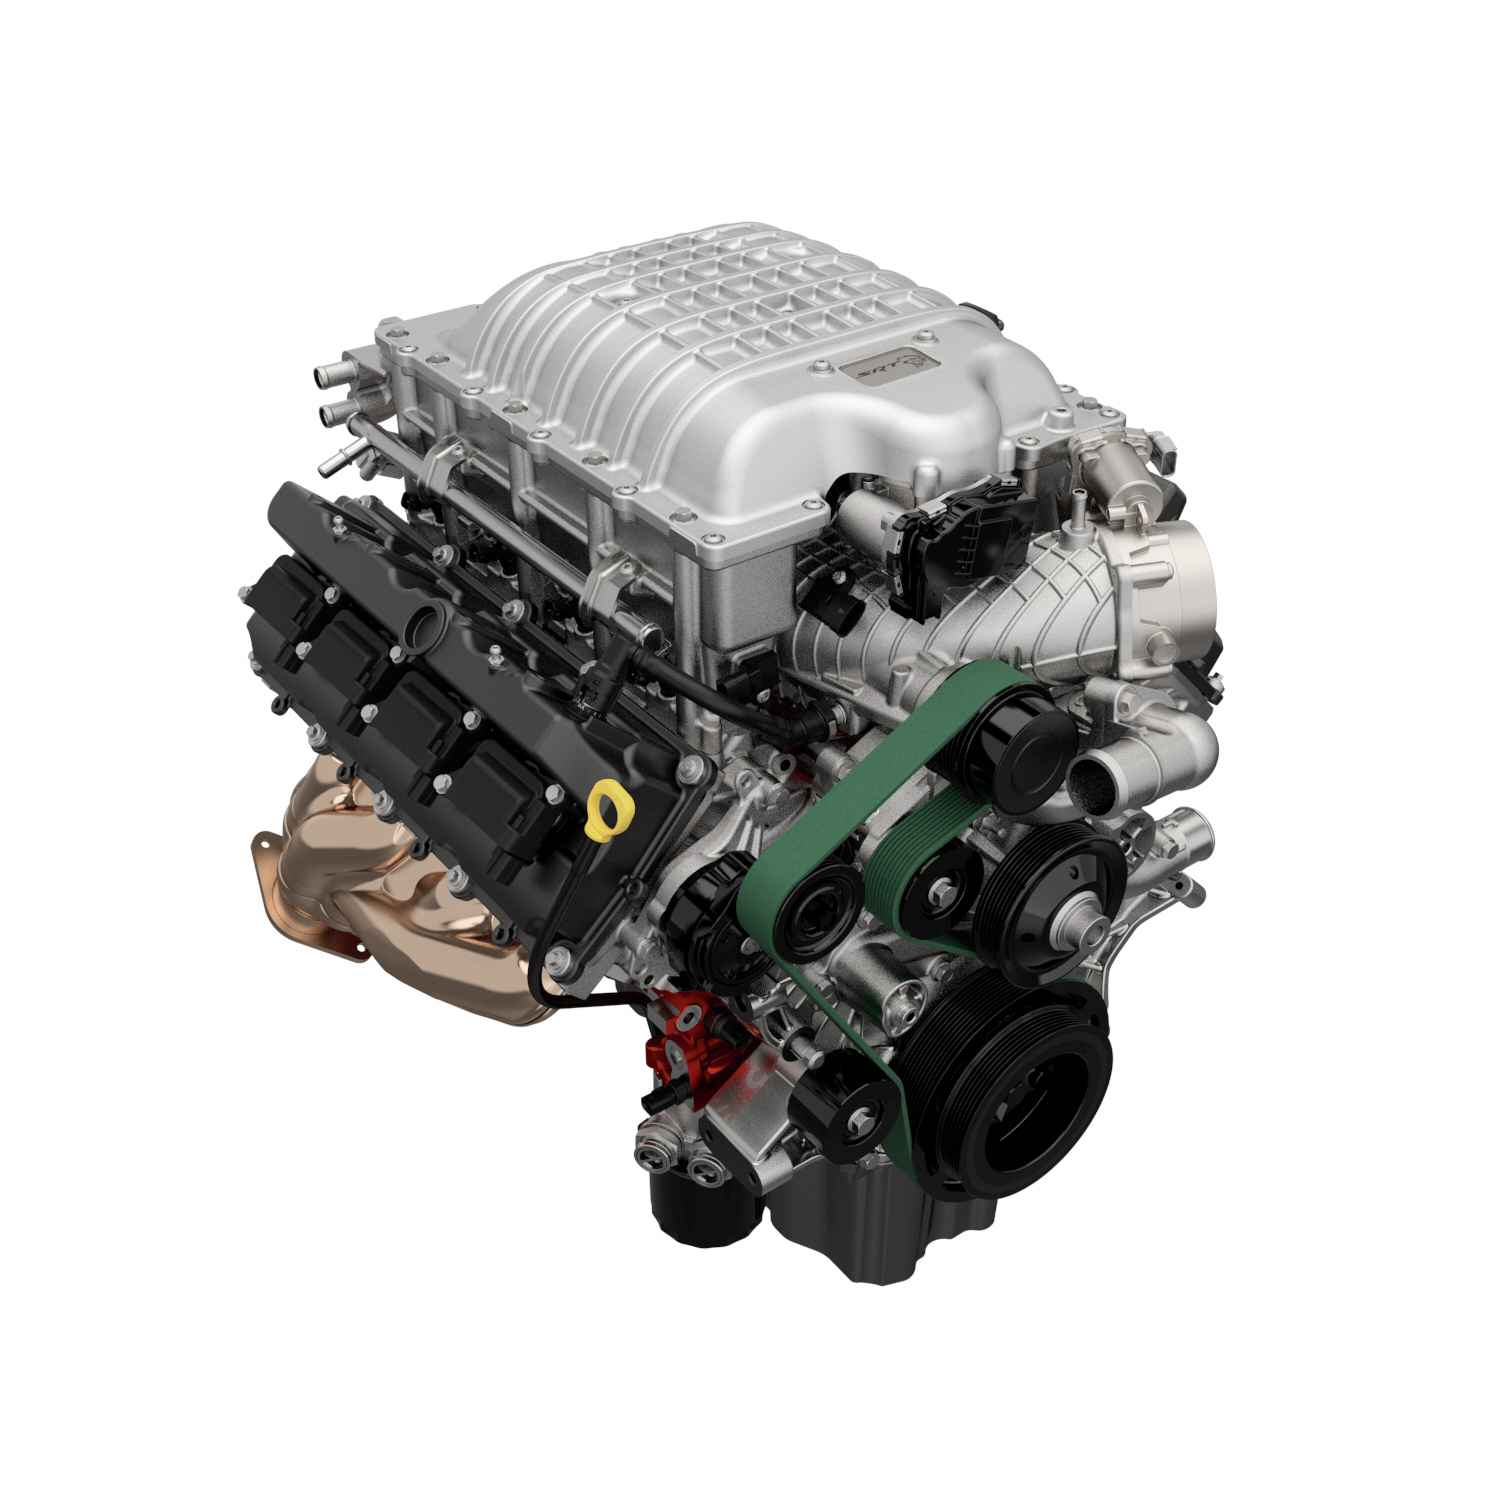 Hellcrate Redeye 62L Supercharged Crate HEMI Engine